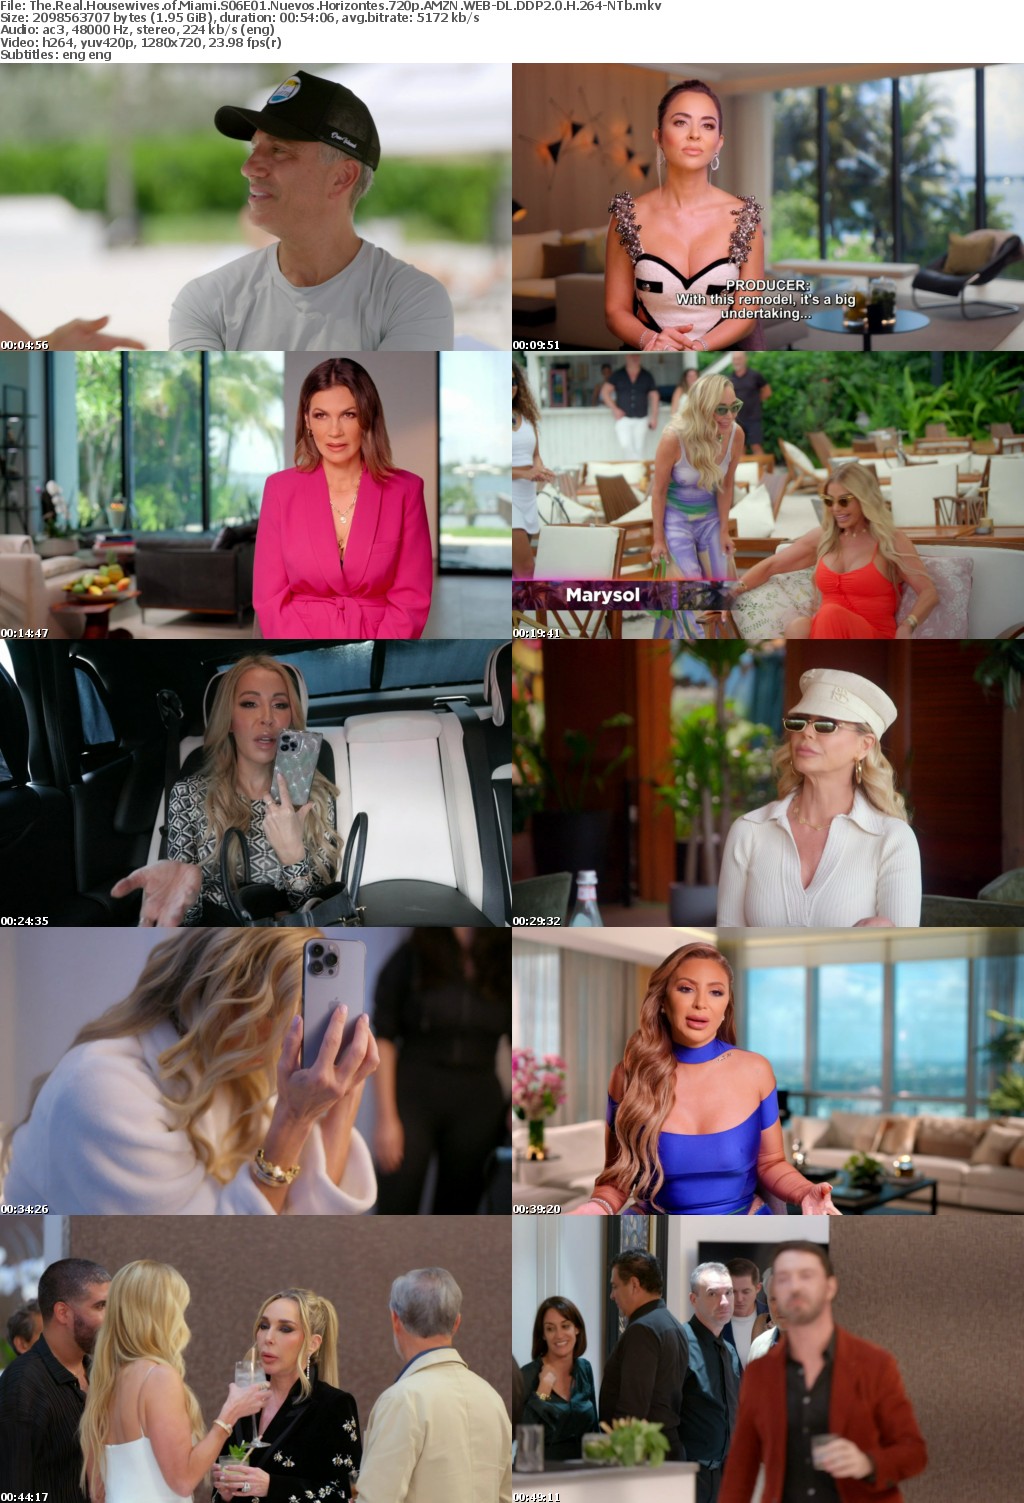 The Real Housewives of Miami S06E01 Nuevos Horizontes 720p AMZN WEB-DL DDP2 0 H 264-NTb